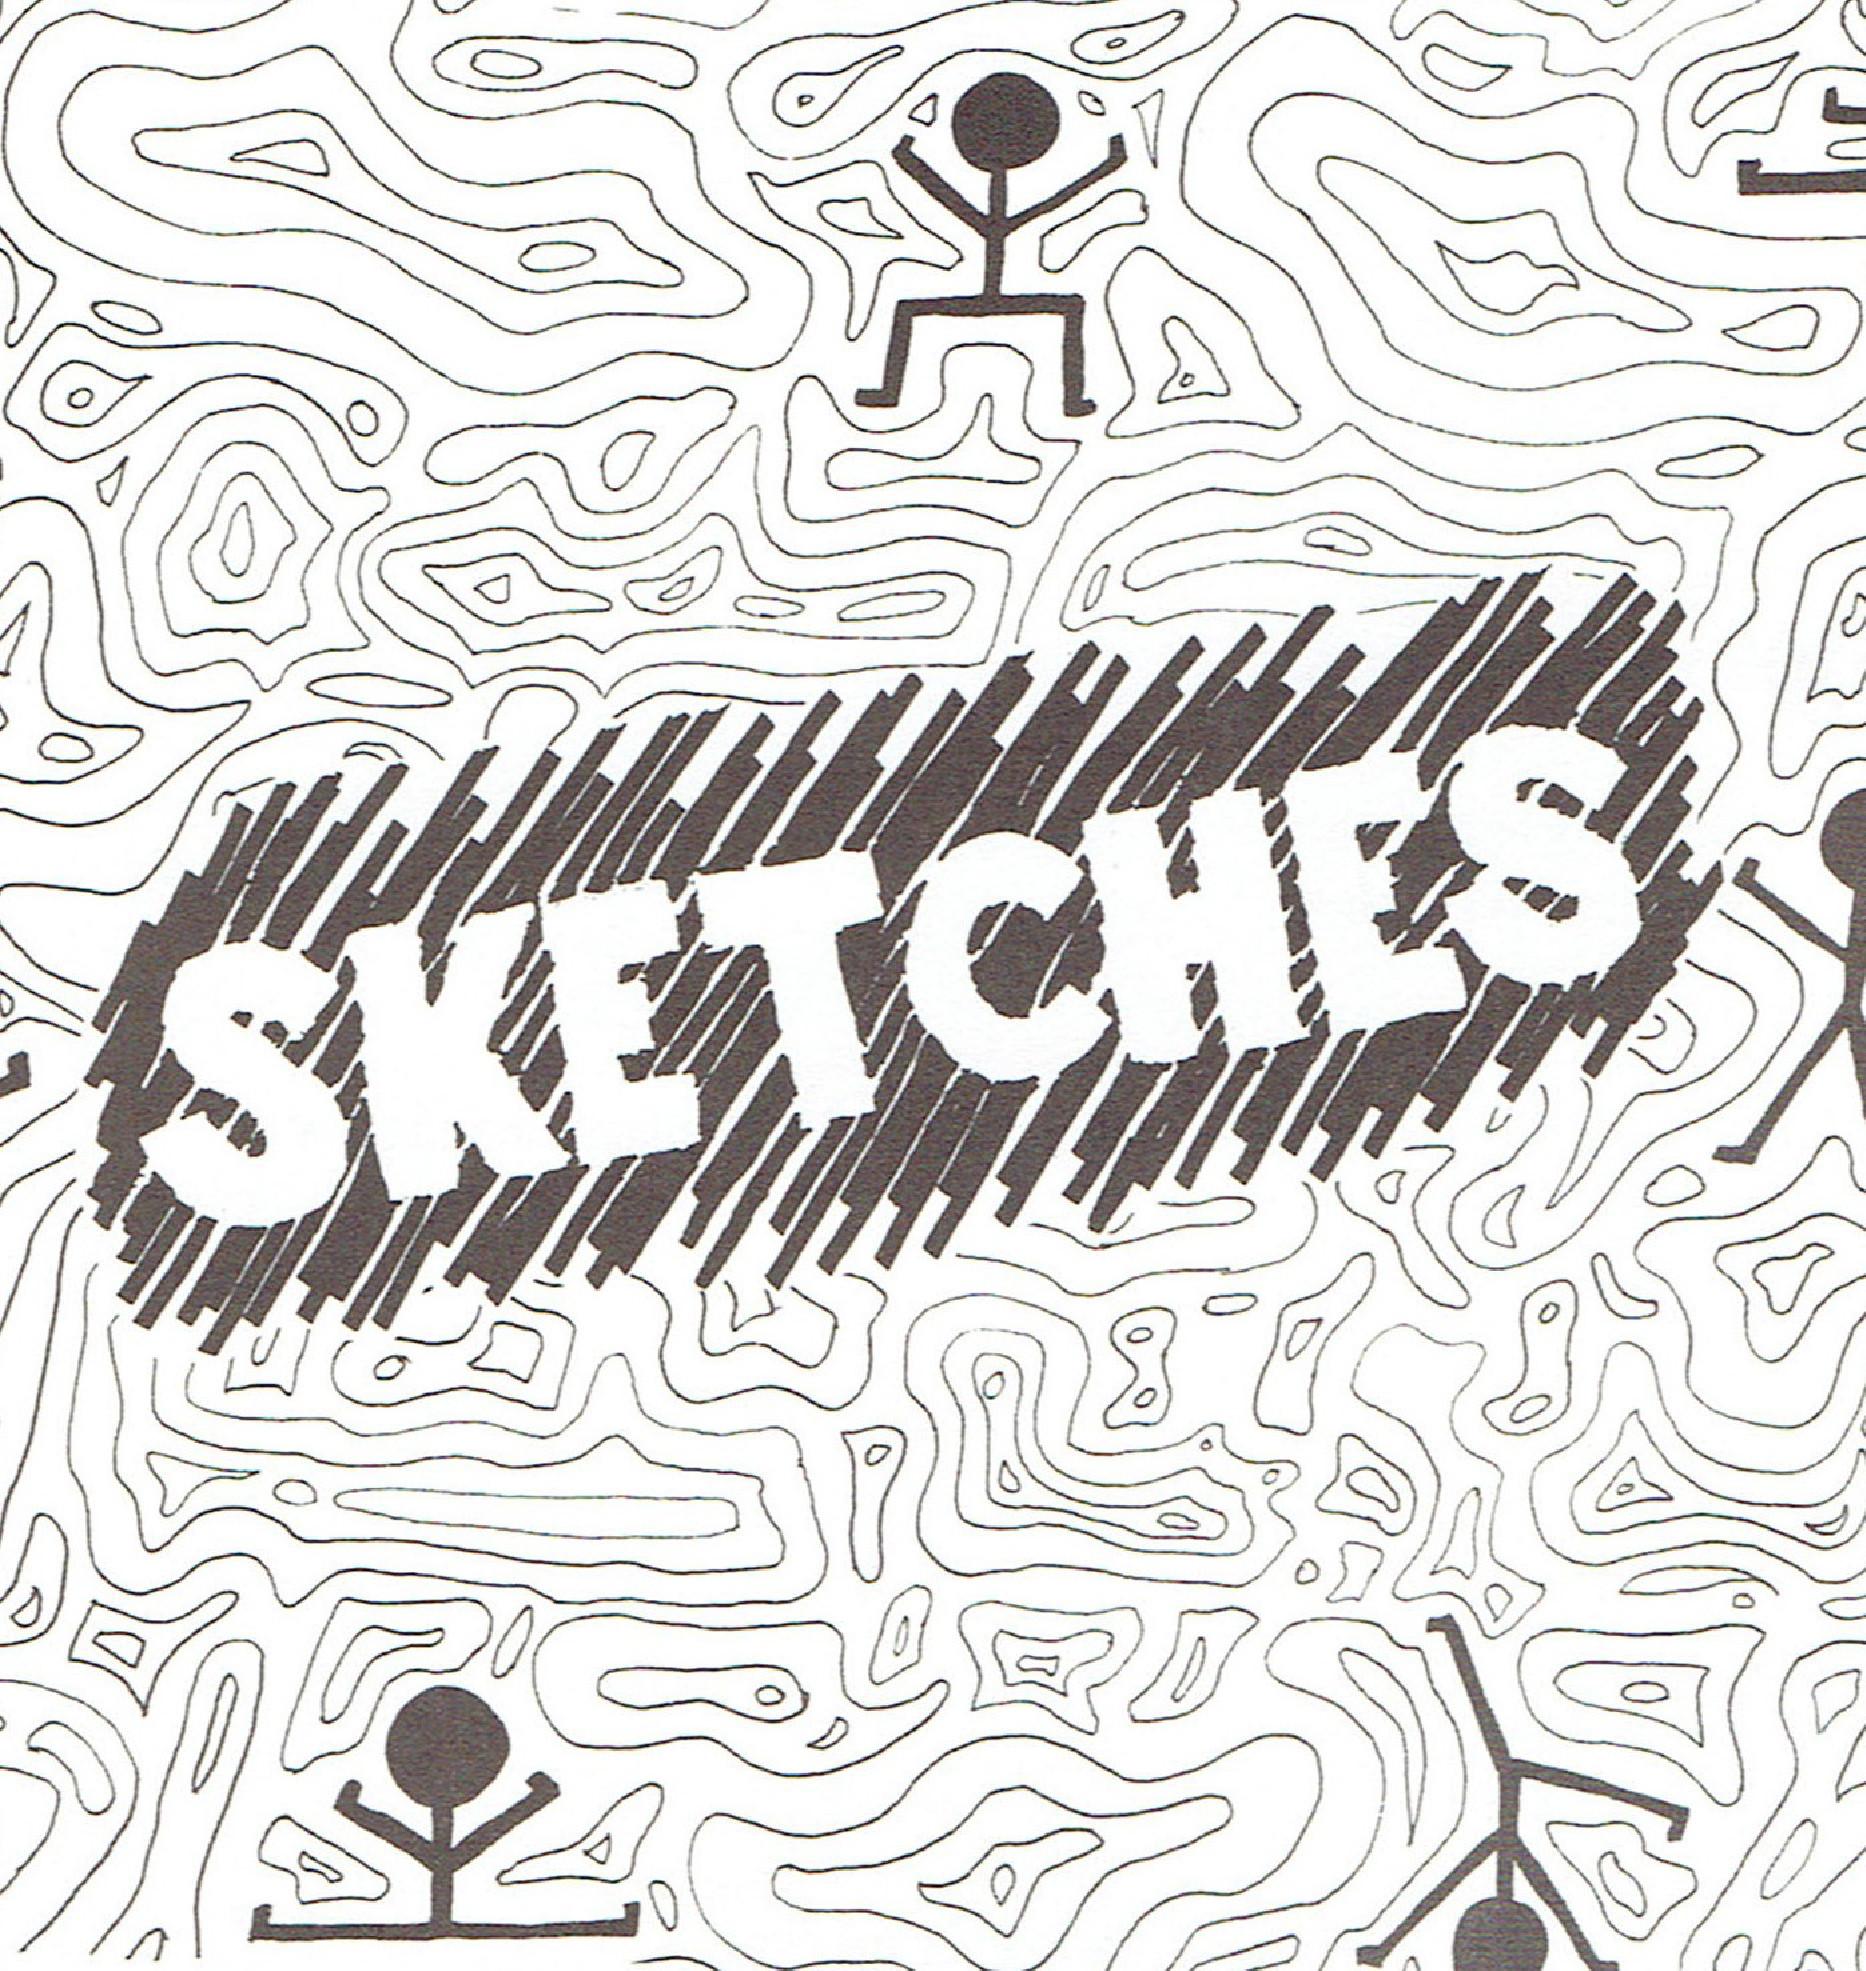 Sketches - Comedy and Drama Sketches for Teens